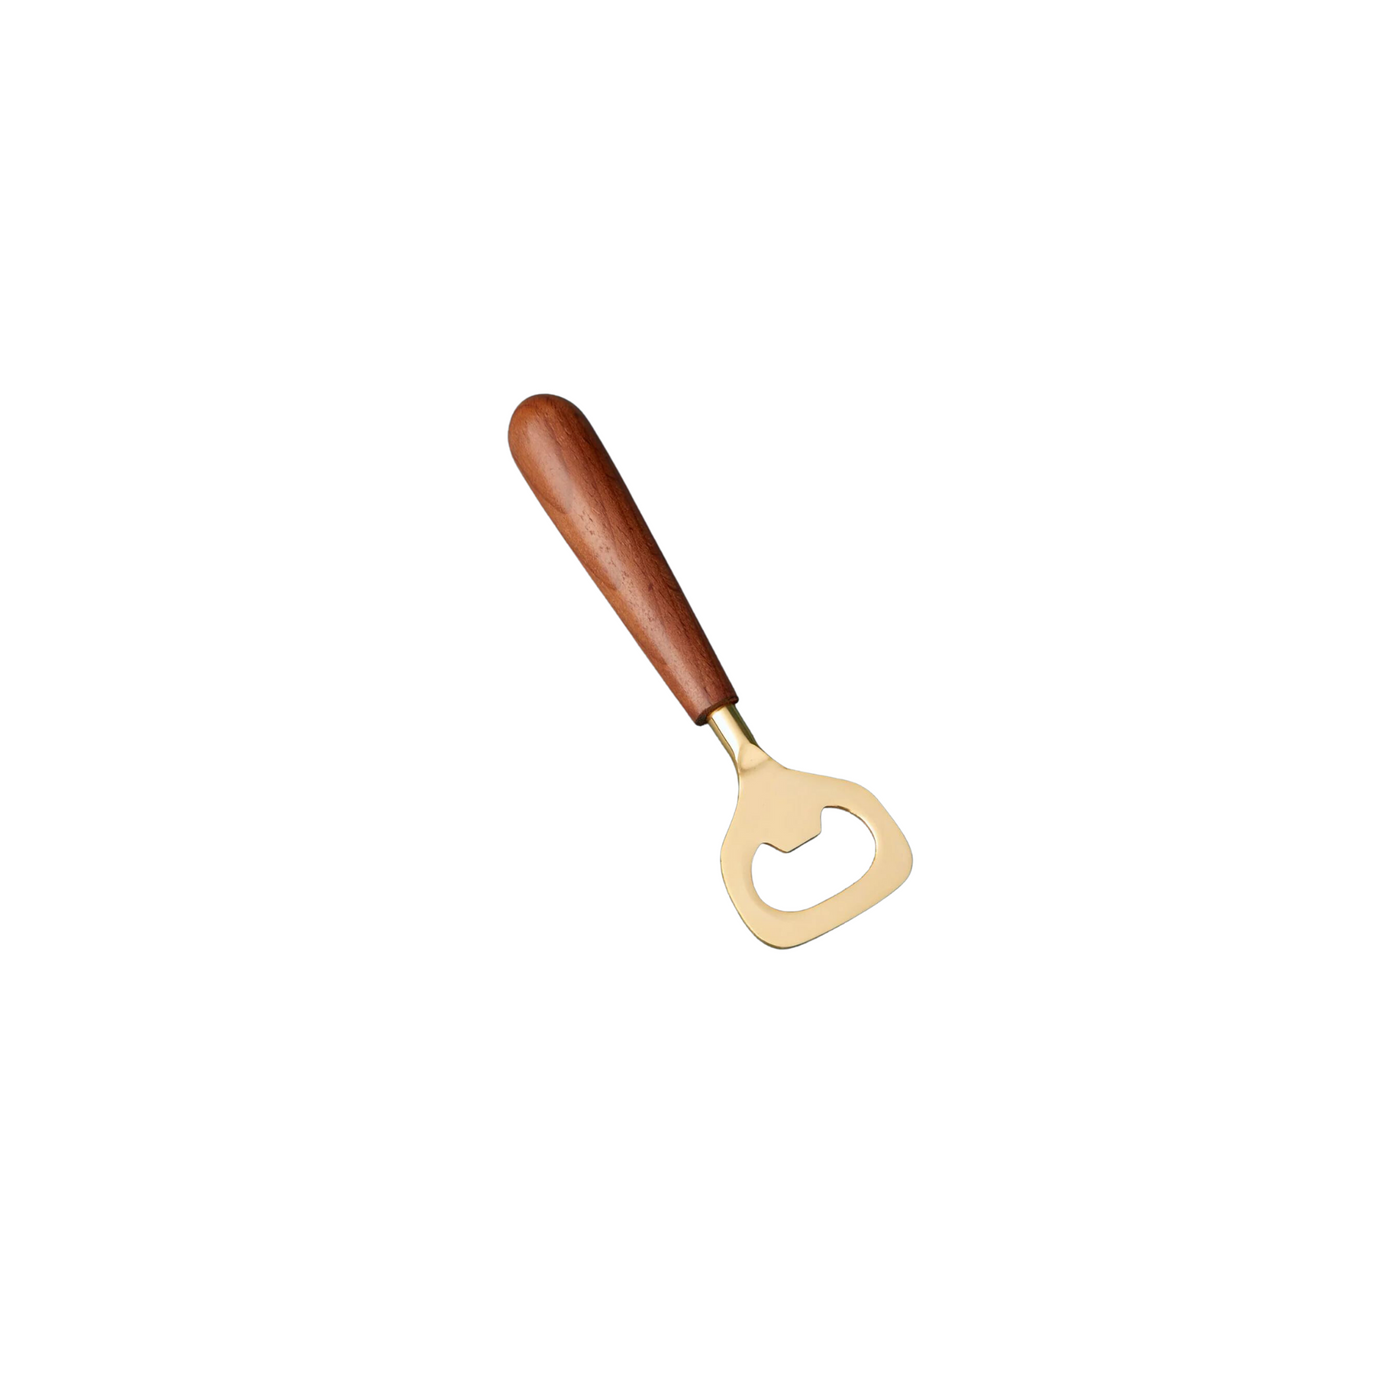 Gold Tone Bronze & Wood Bottle Opener by Be Home